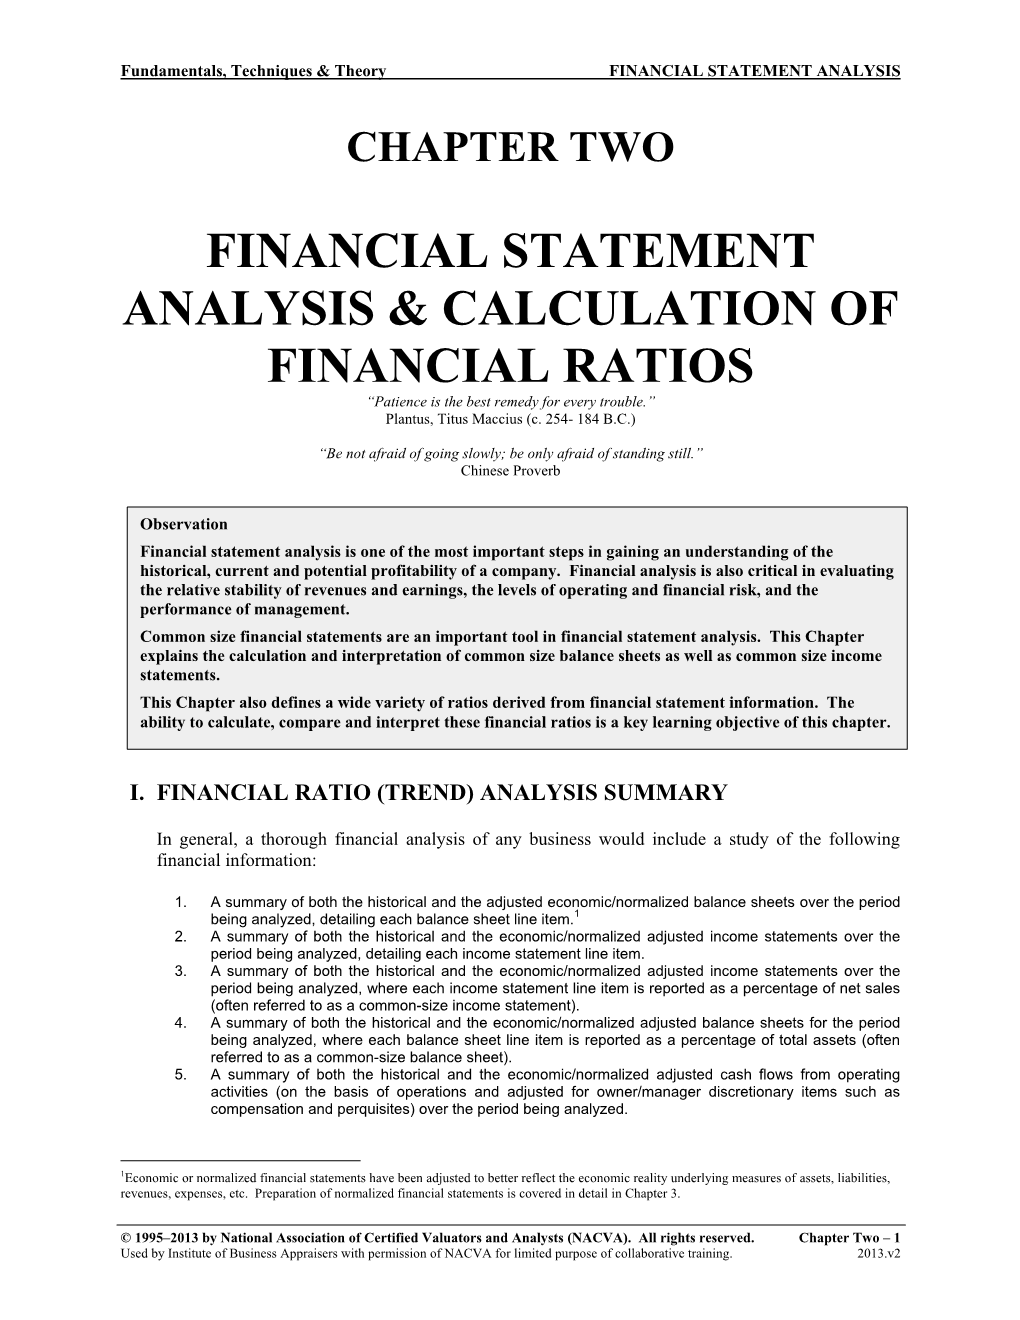 Financial Statement Analysis & Calculation of Financial